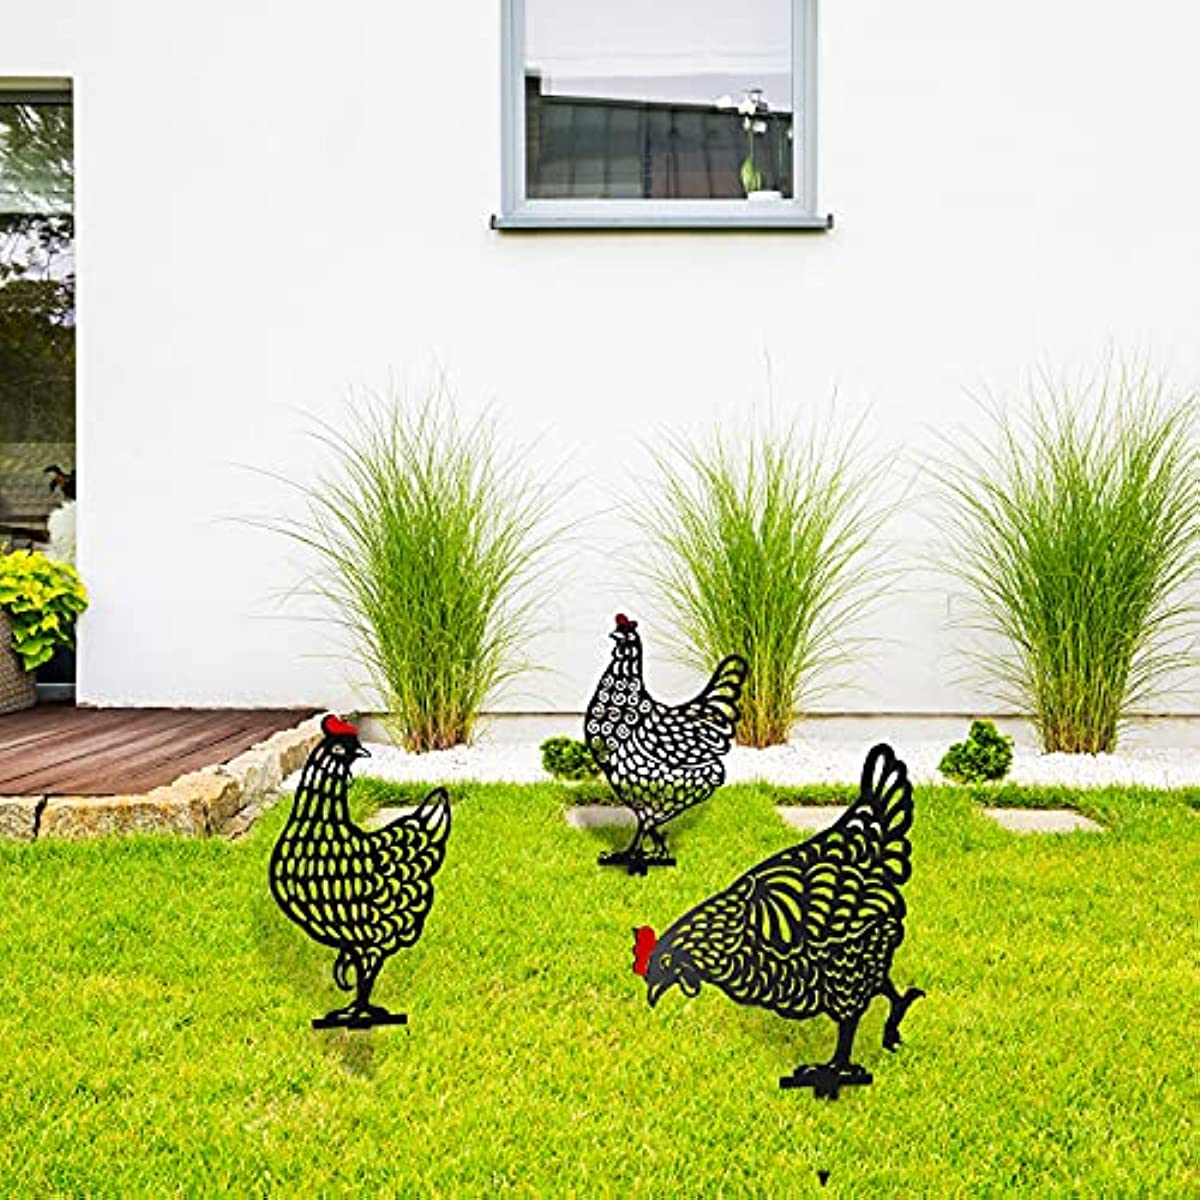 Chicken & Rooster Garden Stakes, Set of 3 Different Styles of Acrylic Chickens Silhouette Stakes